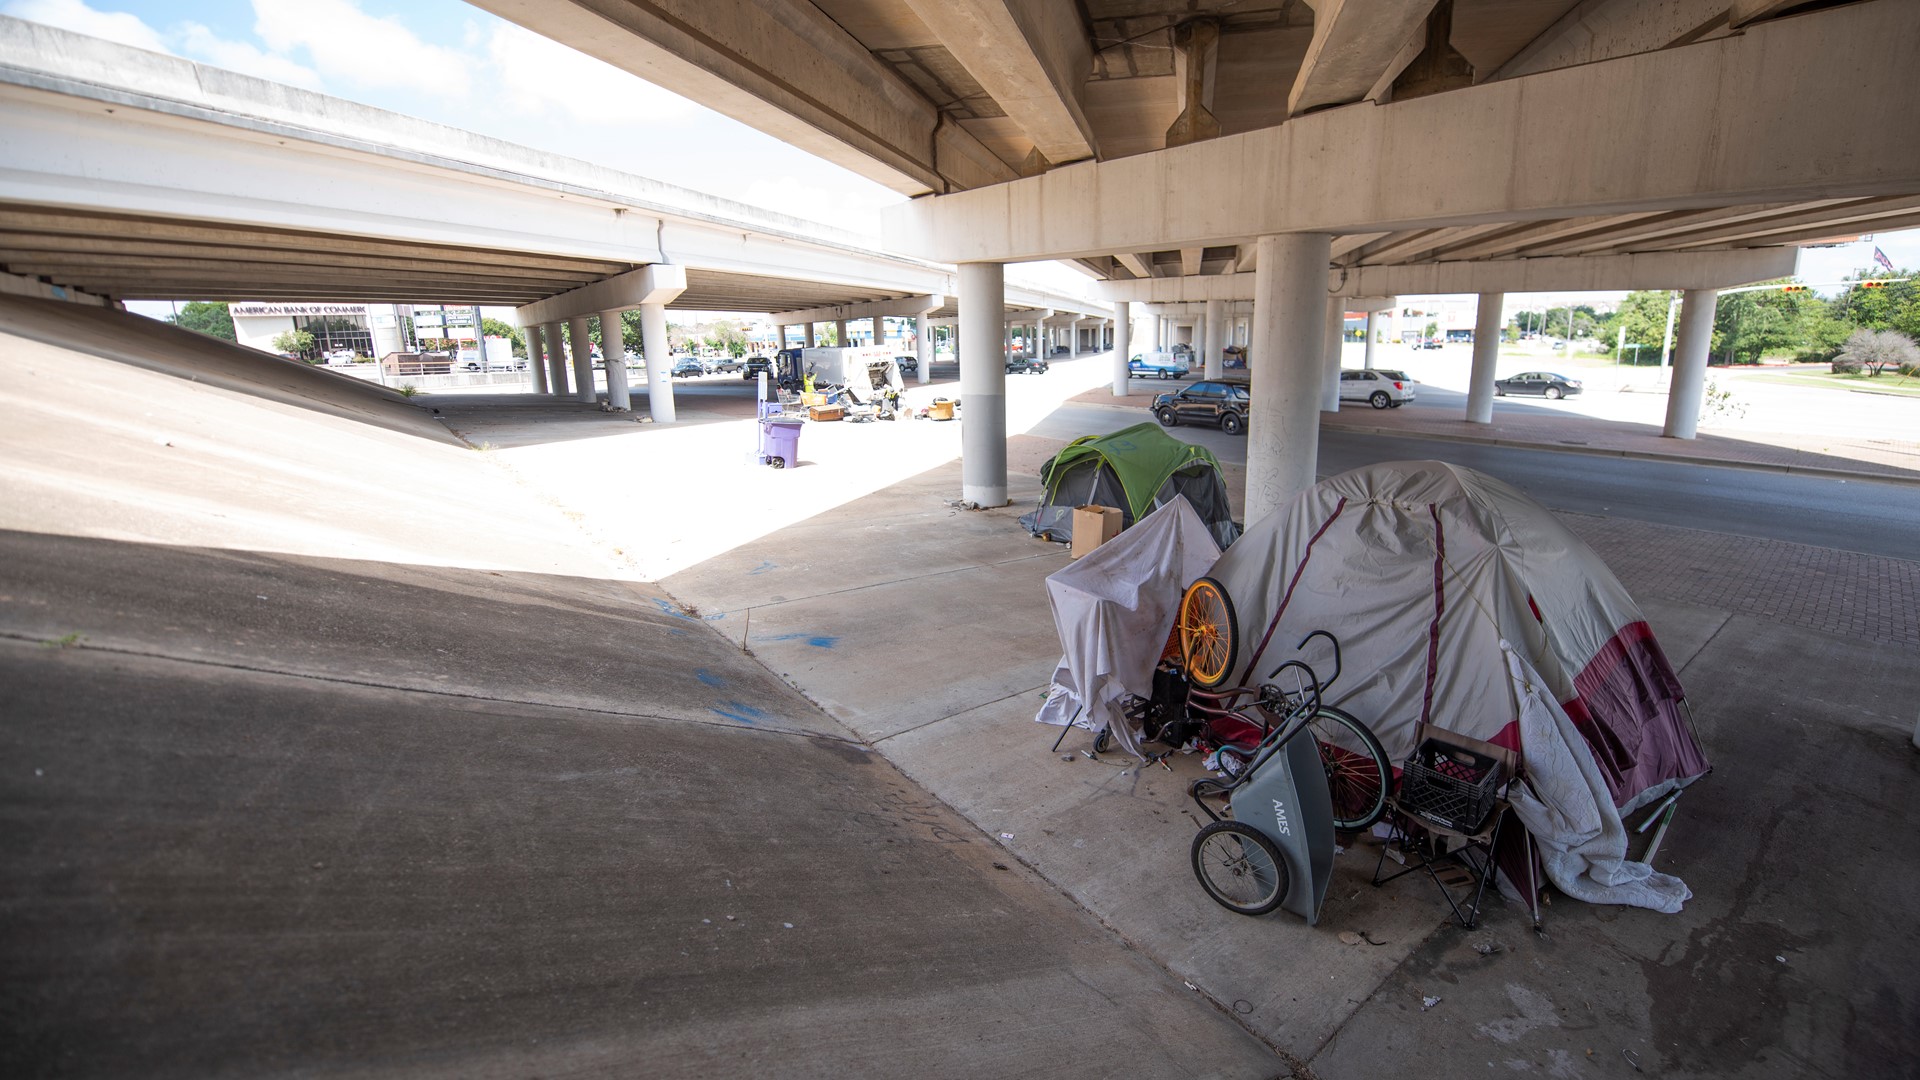 The U.S. Supreme Court is considering whether cities can punish people for sleeping outside when shelter space is lacking.